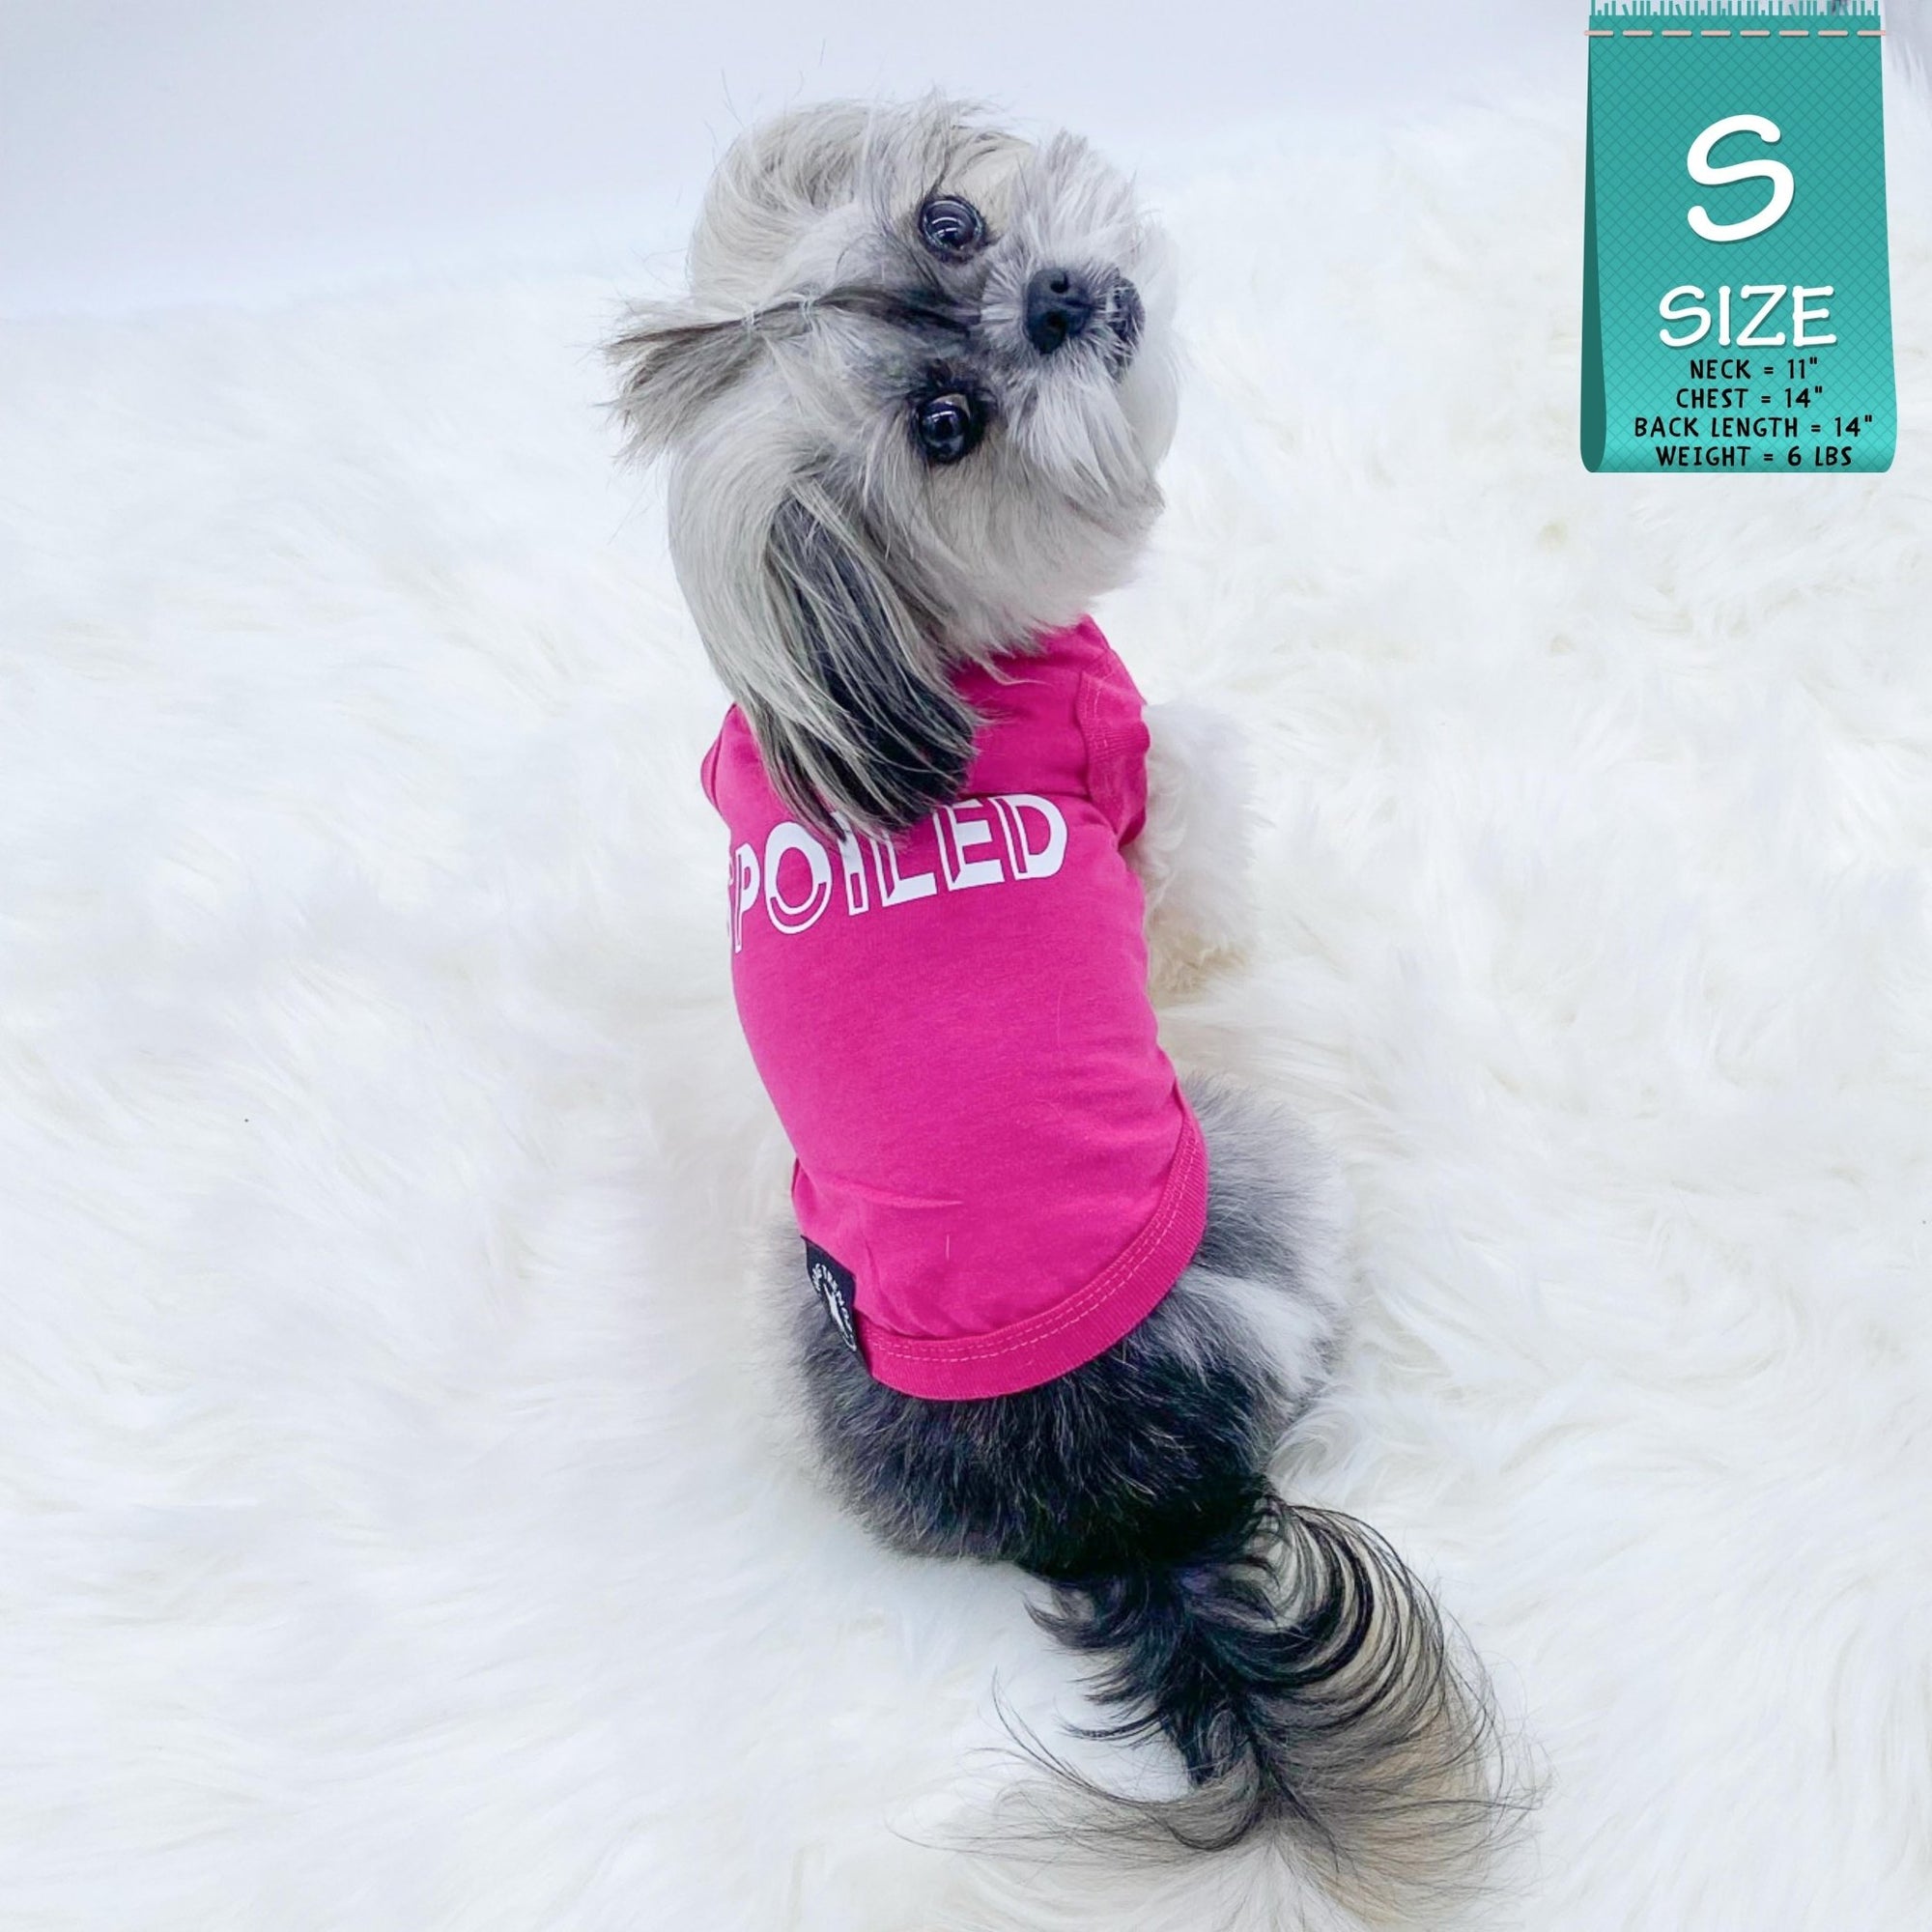 Dog T-Shirt - Shih Tzu mix wearing &quot;Spoiled&quot; dog t-shirt in hot pink with SPOILED lettering in white - against solid white background - Wag Trendz